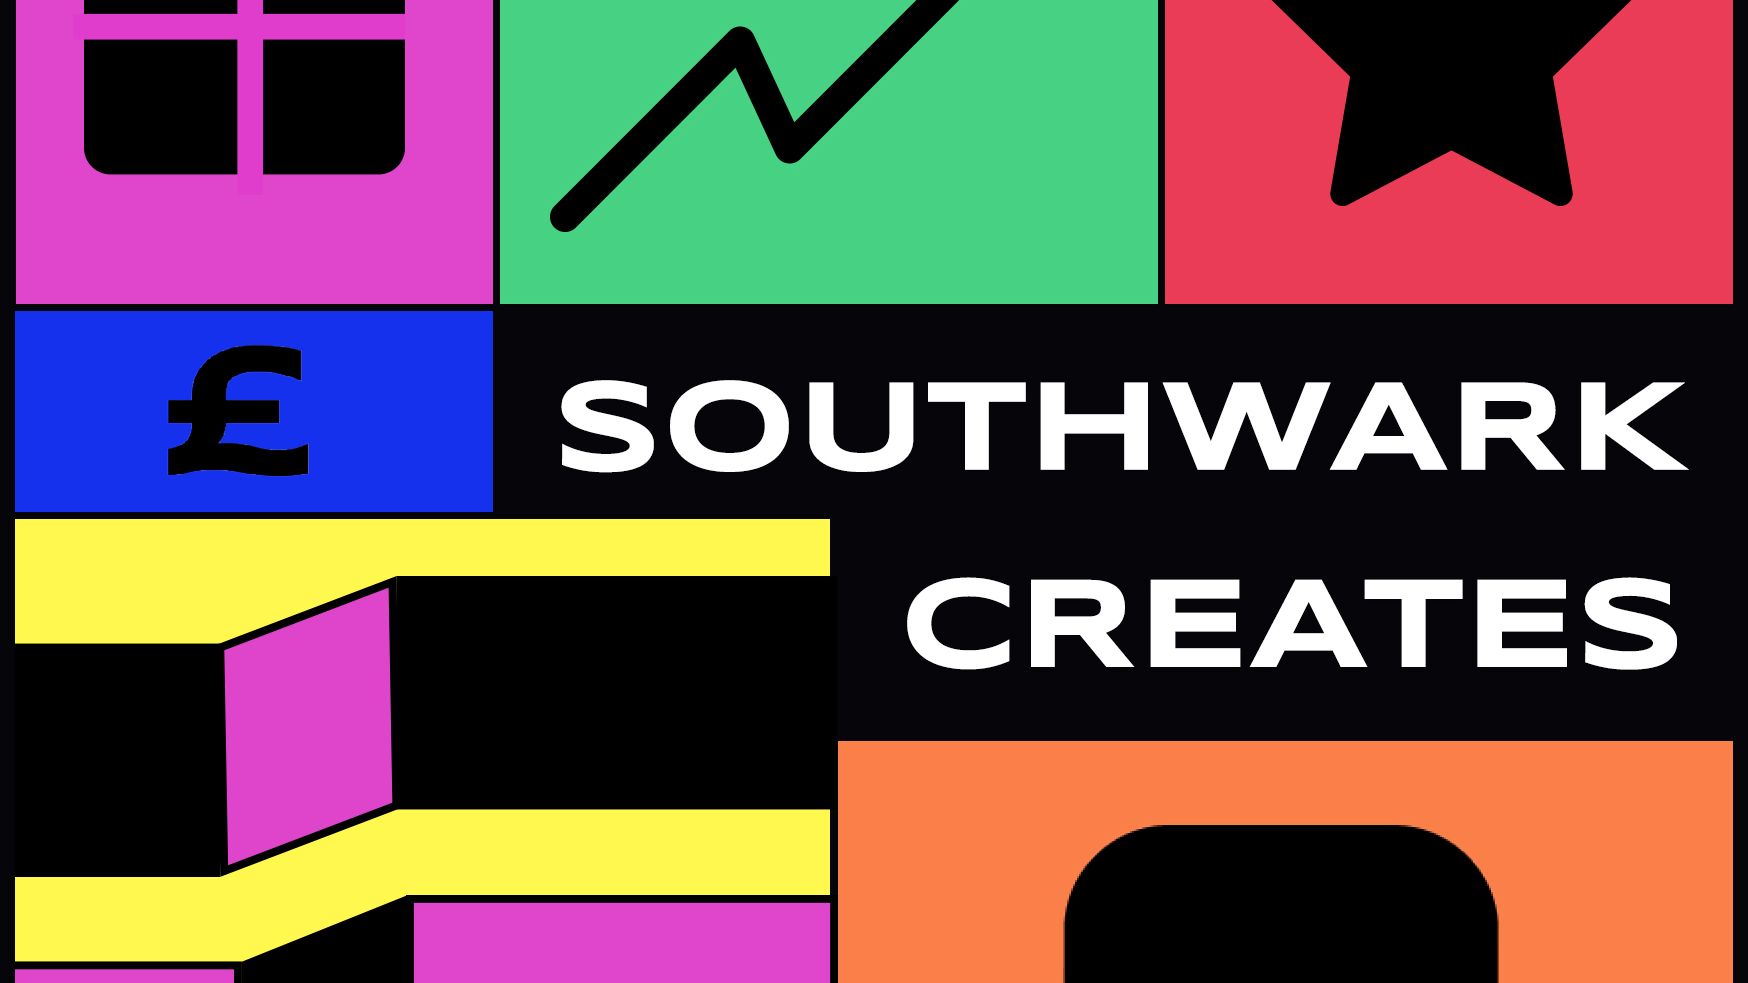 Poster for Southwark Creates made up of brightly coloured graphic shapes.